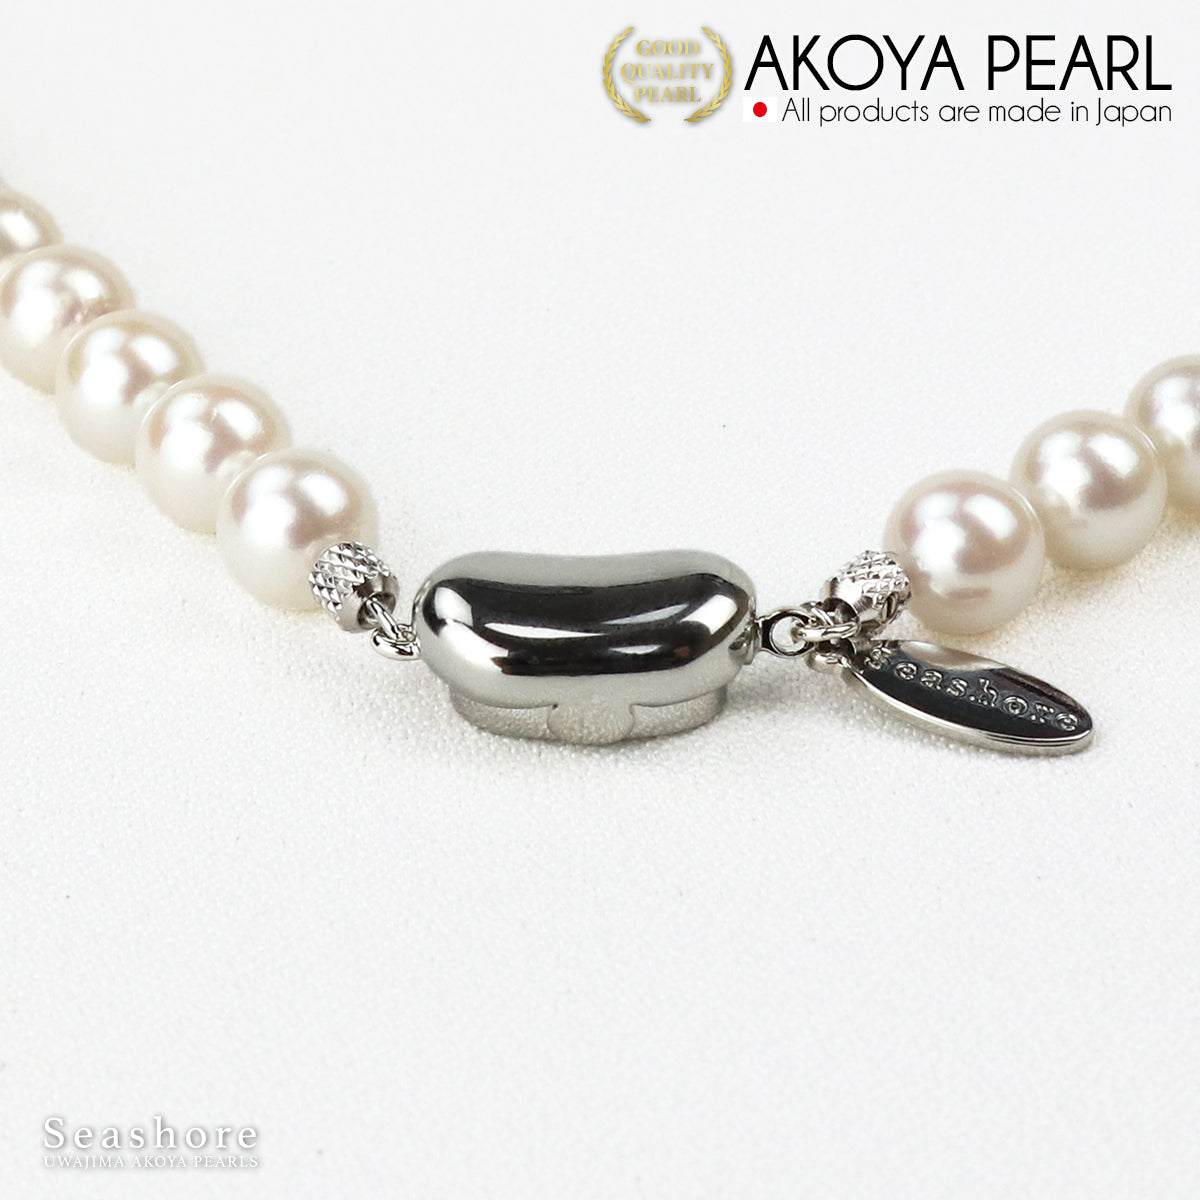 Akoya Pearl Large Bead Formal Necklace 2 Piece Set for Women [8.5-9.0mm] (Earrings included) Formal Set with Certificate of Authenticity and Storage Case [TV Shopping]